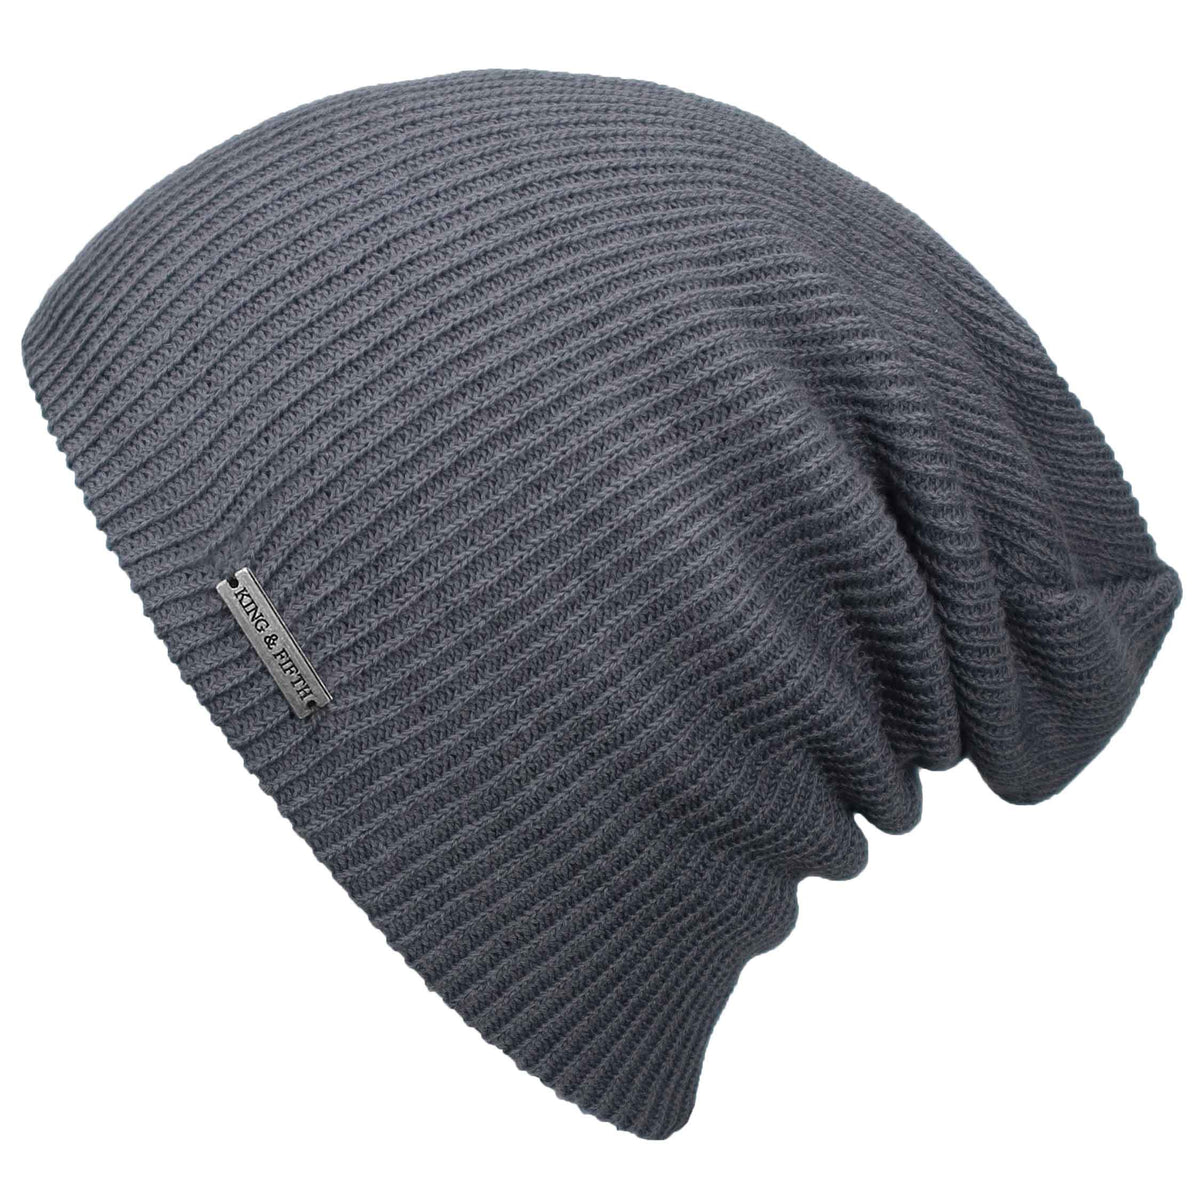 - The Thin Supply Forte Beanie Summer Beanie King LW Mens - Fifth - K&F Slouchy and